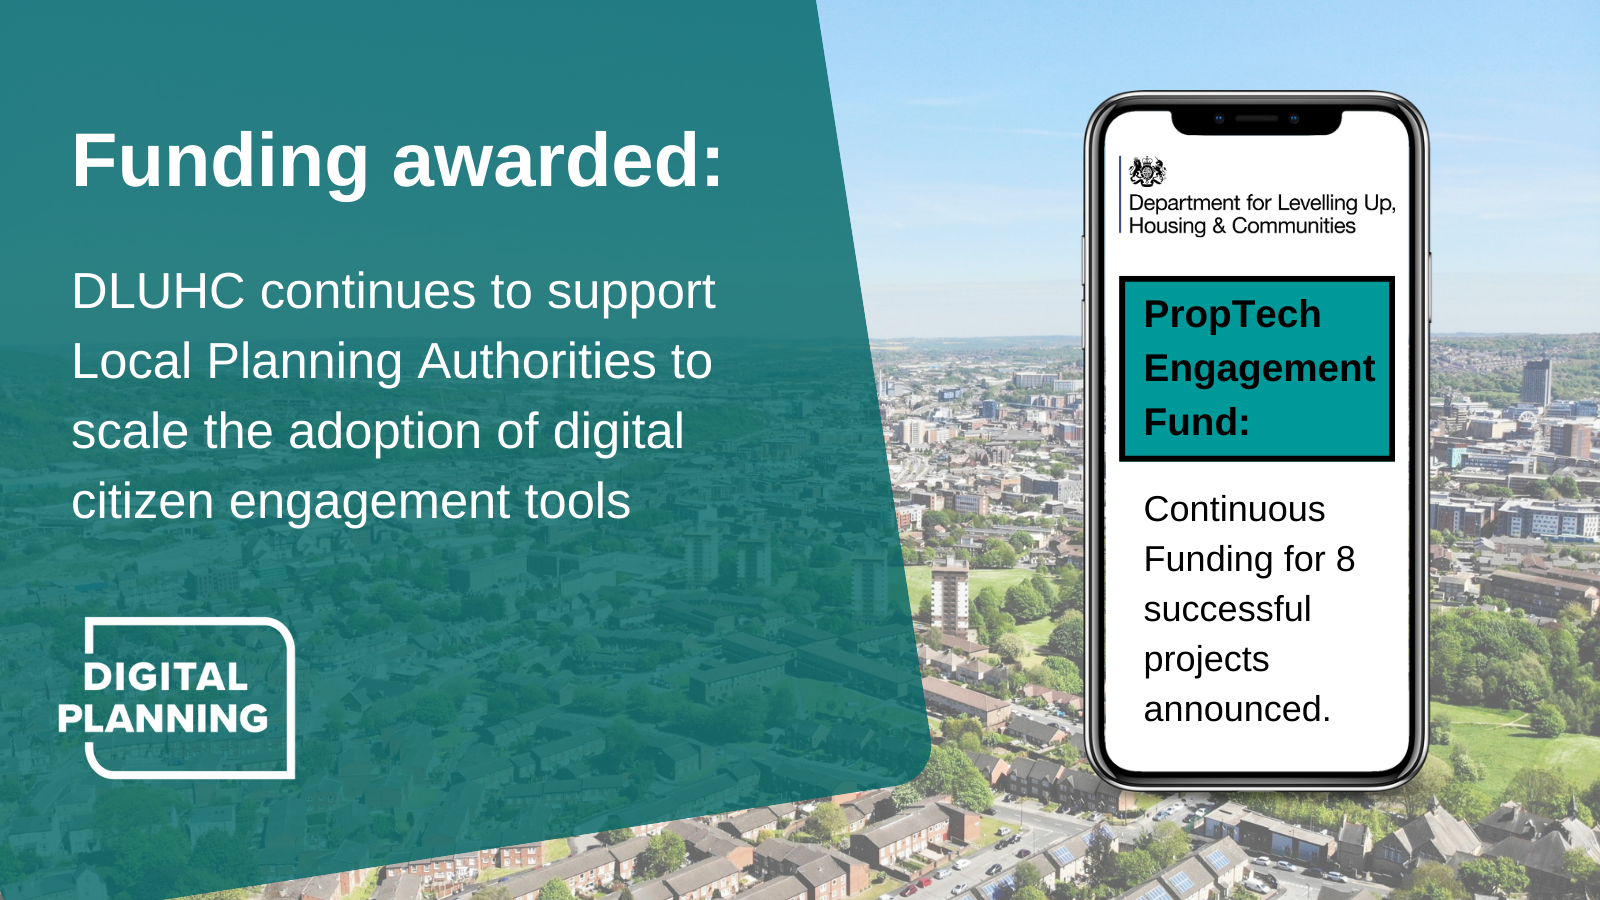 Funding Awarded: DLUHC continues to support Local Planning Authorities to scale the adoption of digital citizen engagement tools. PropTech Engagement Fund: Continuous Funding for 8 successful projects announced. DLUHC Logo. Digital Planning Logo.